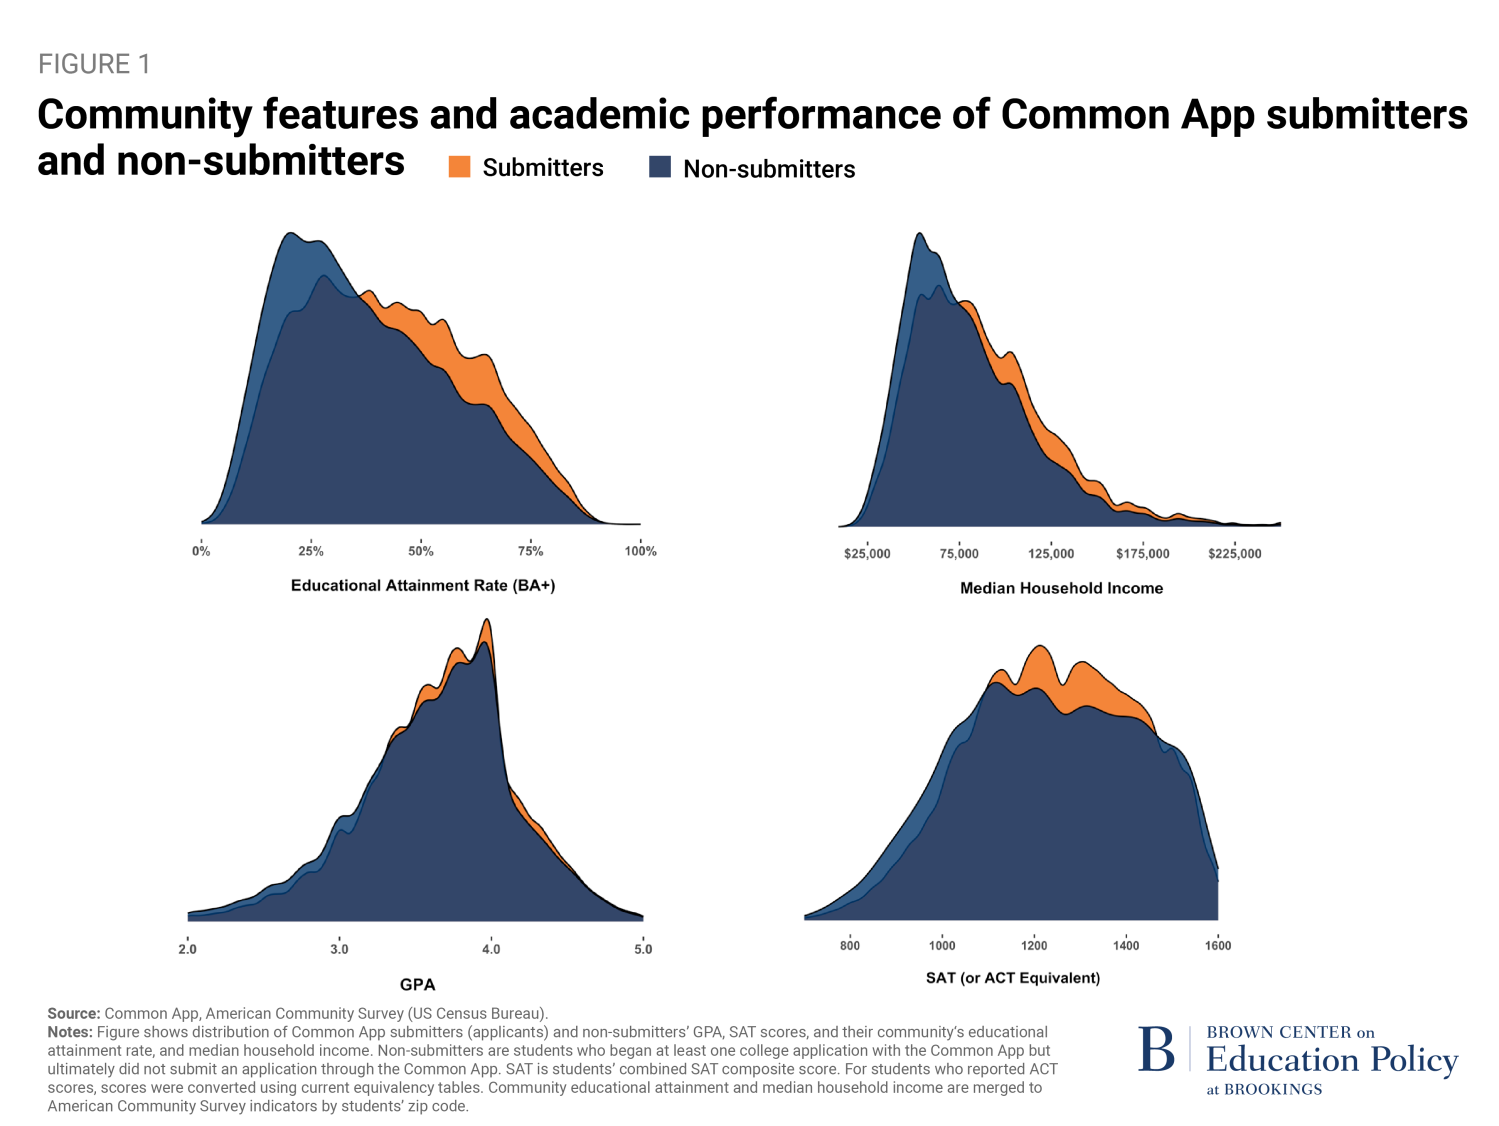 Community features and academic performance of Common App submitters and non-submitters